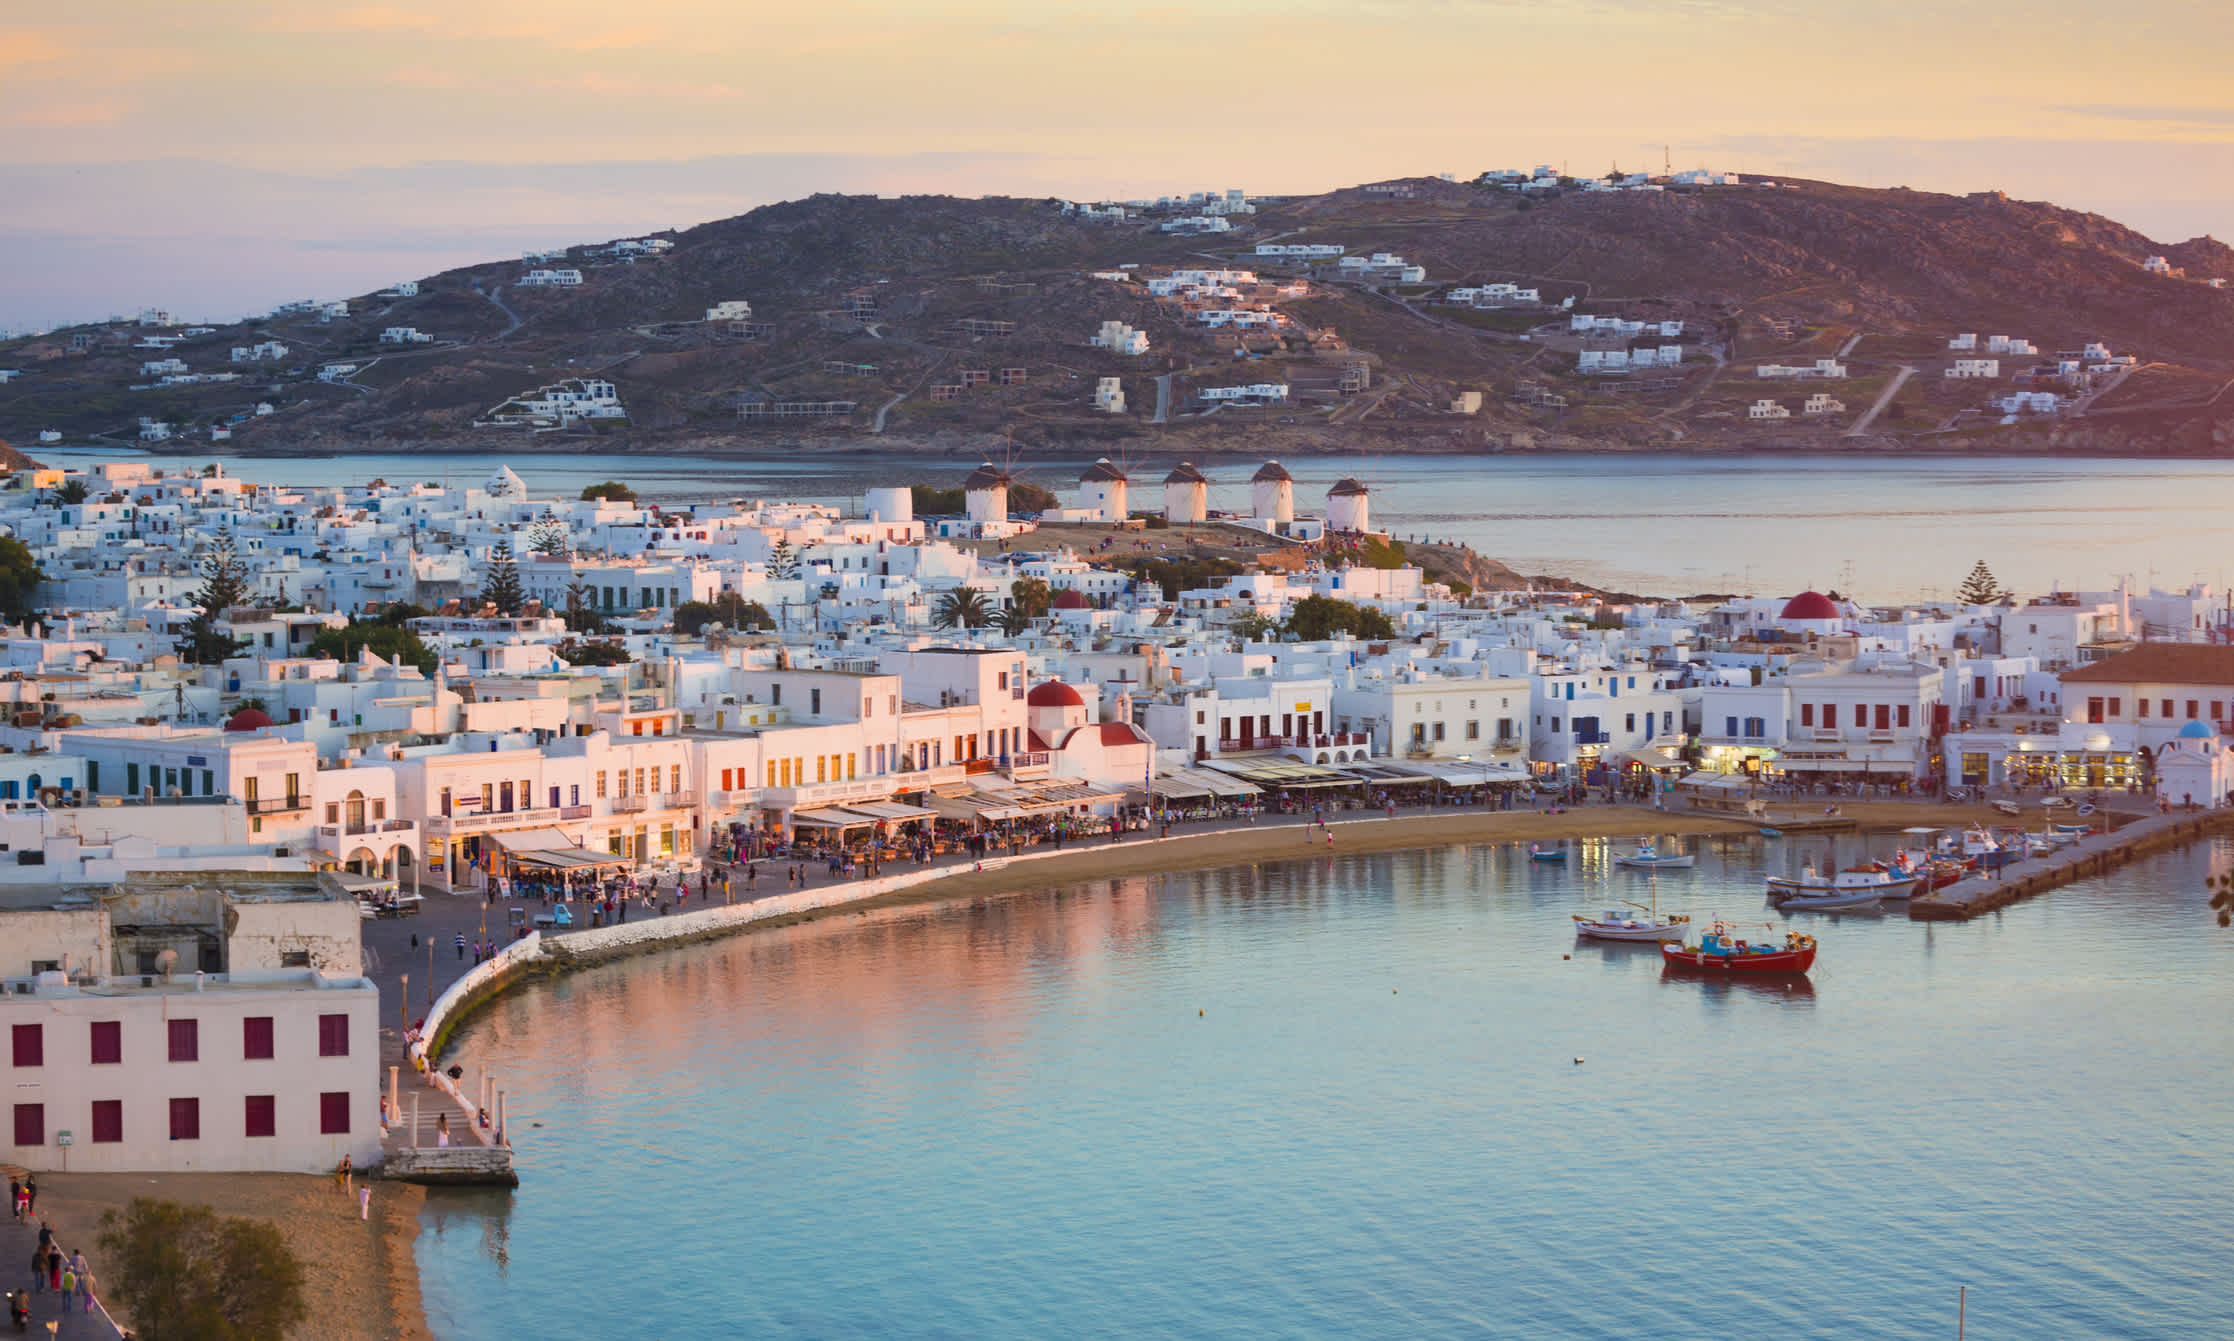 Sunset over Mykonos town, Cyclades Islands in the Aegean Sea, Greece. 
